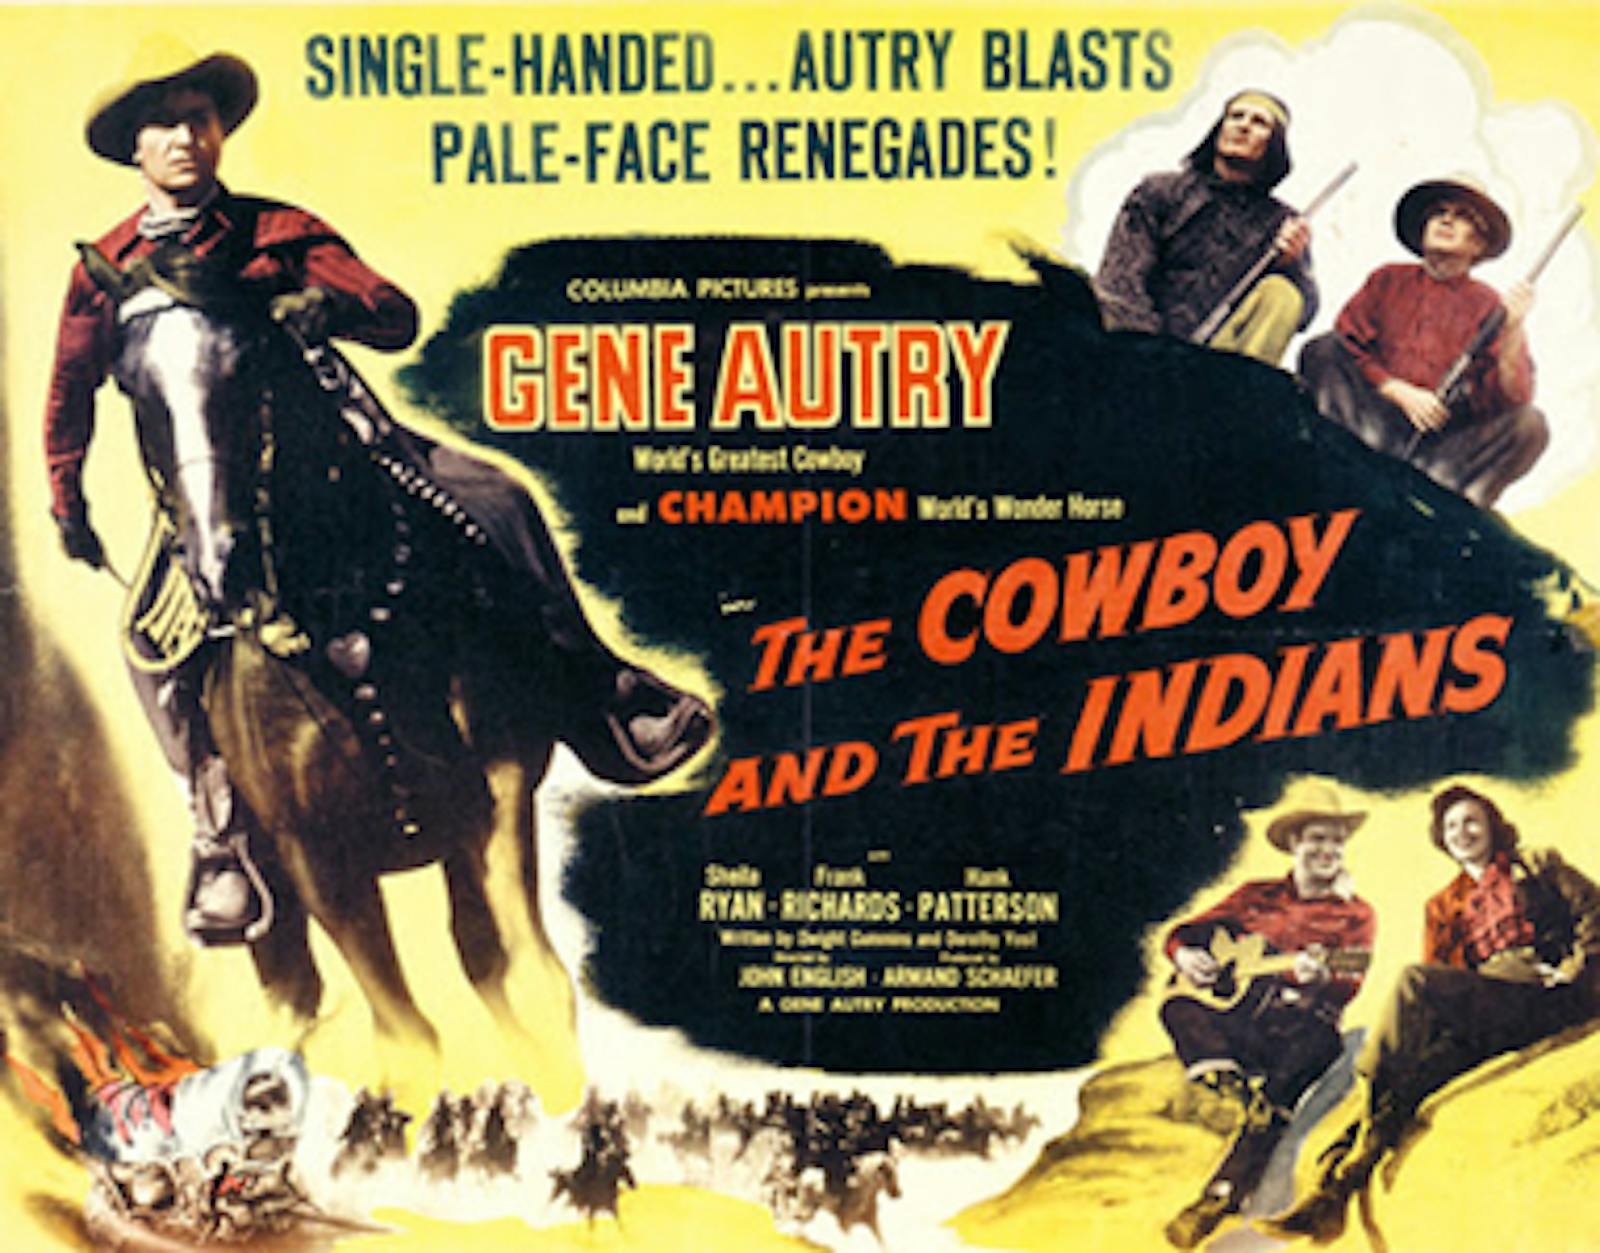 The Cowboy and the Indians lobby card